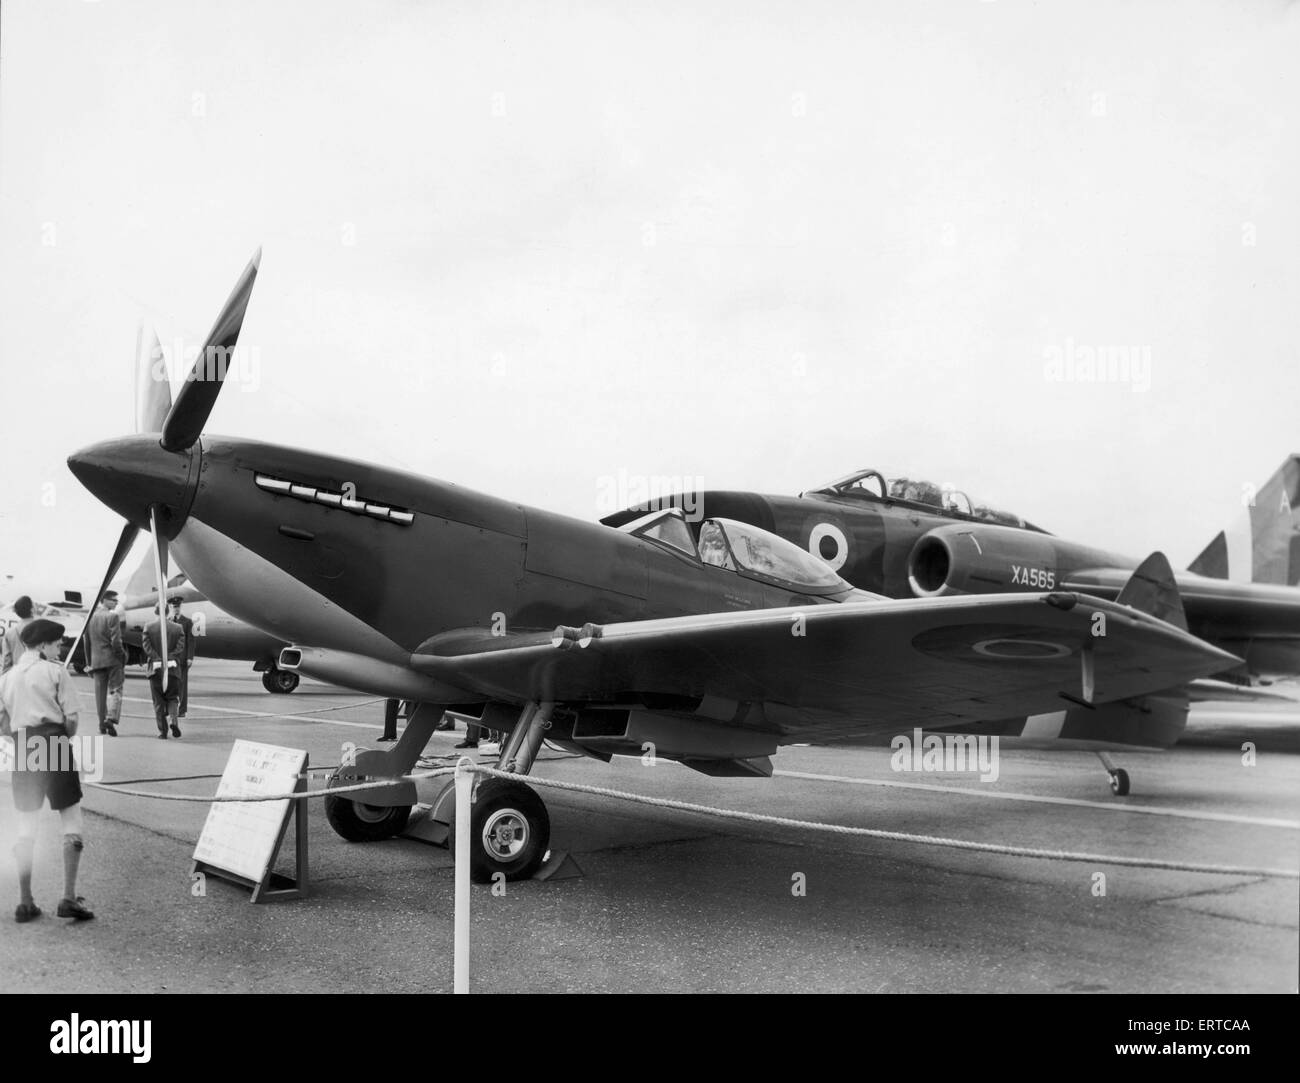 A Spitfire fighter plane on display at Gaydon. September 1960. Stock Photo